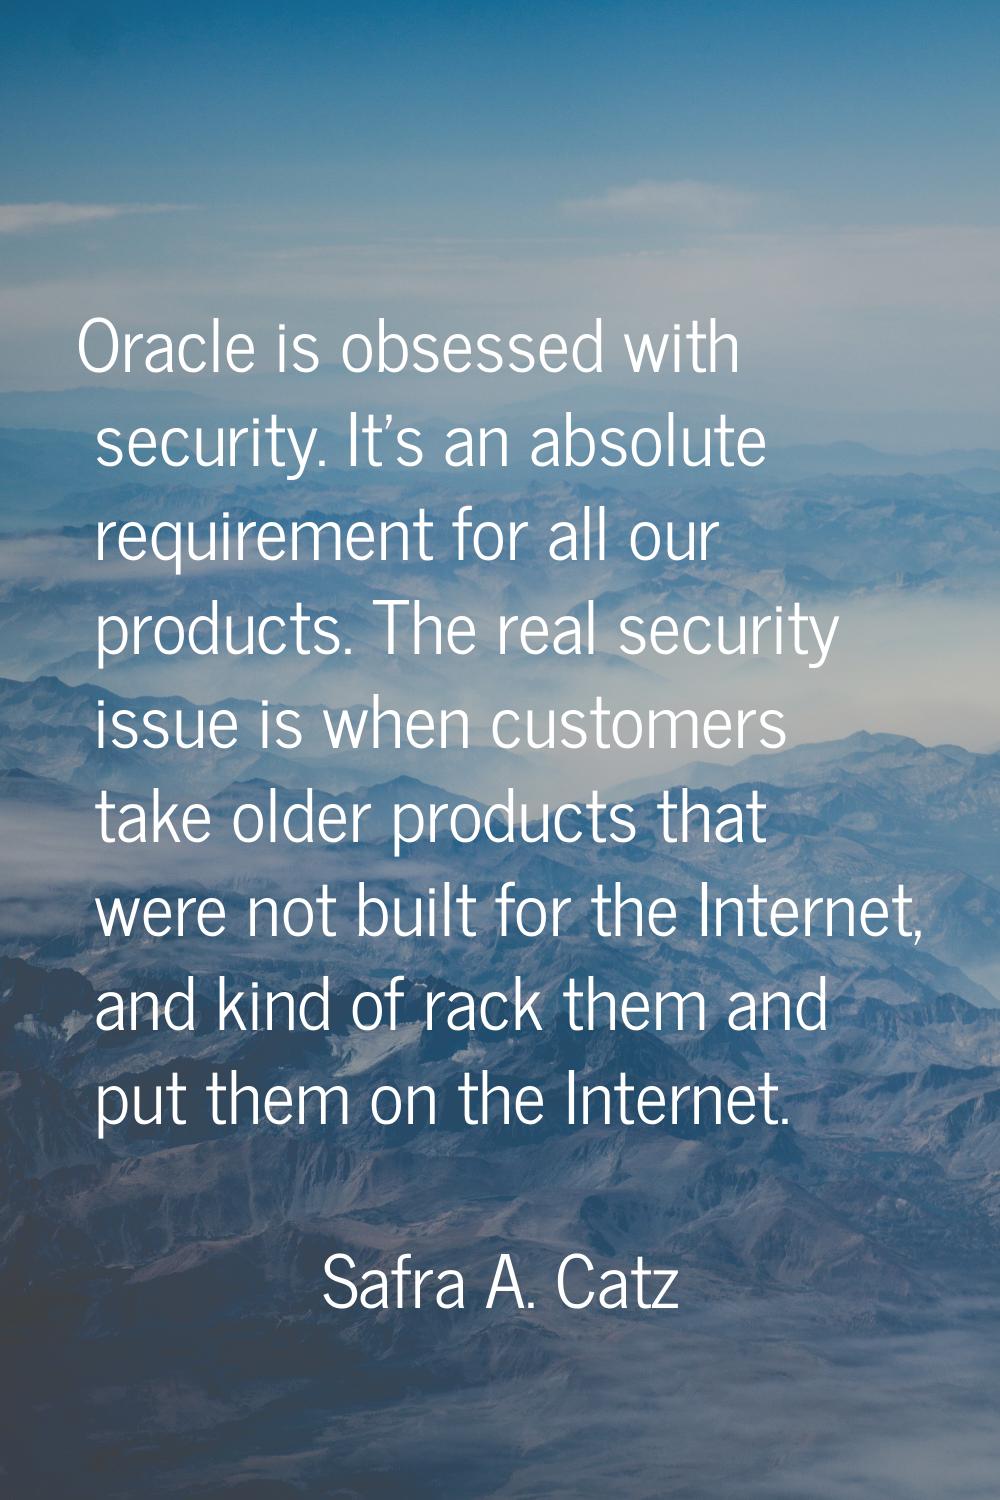 Oracle is obsessed with security. It's an absolute requirement for all our products. The real secur